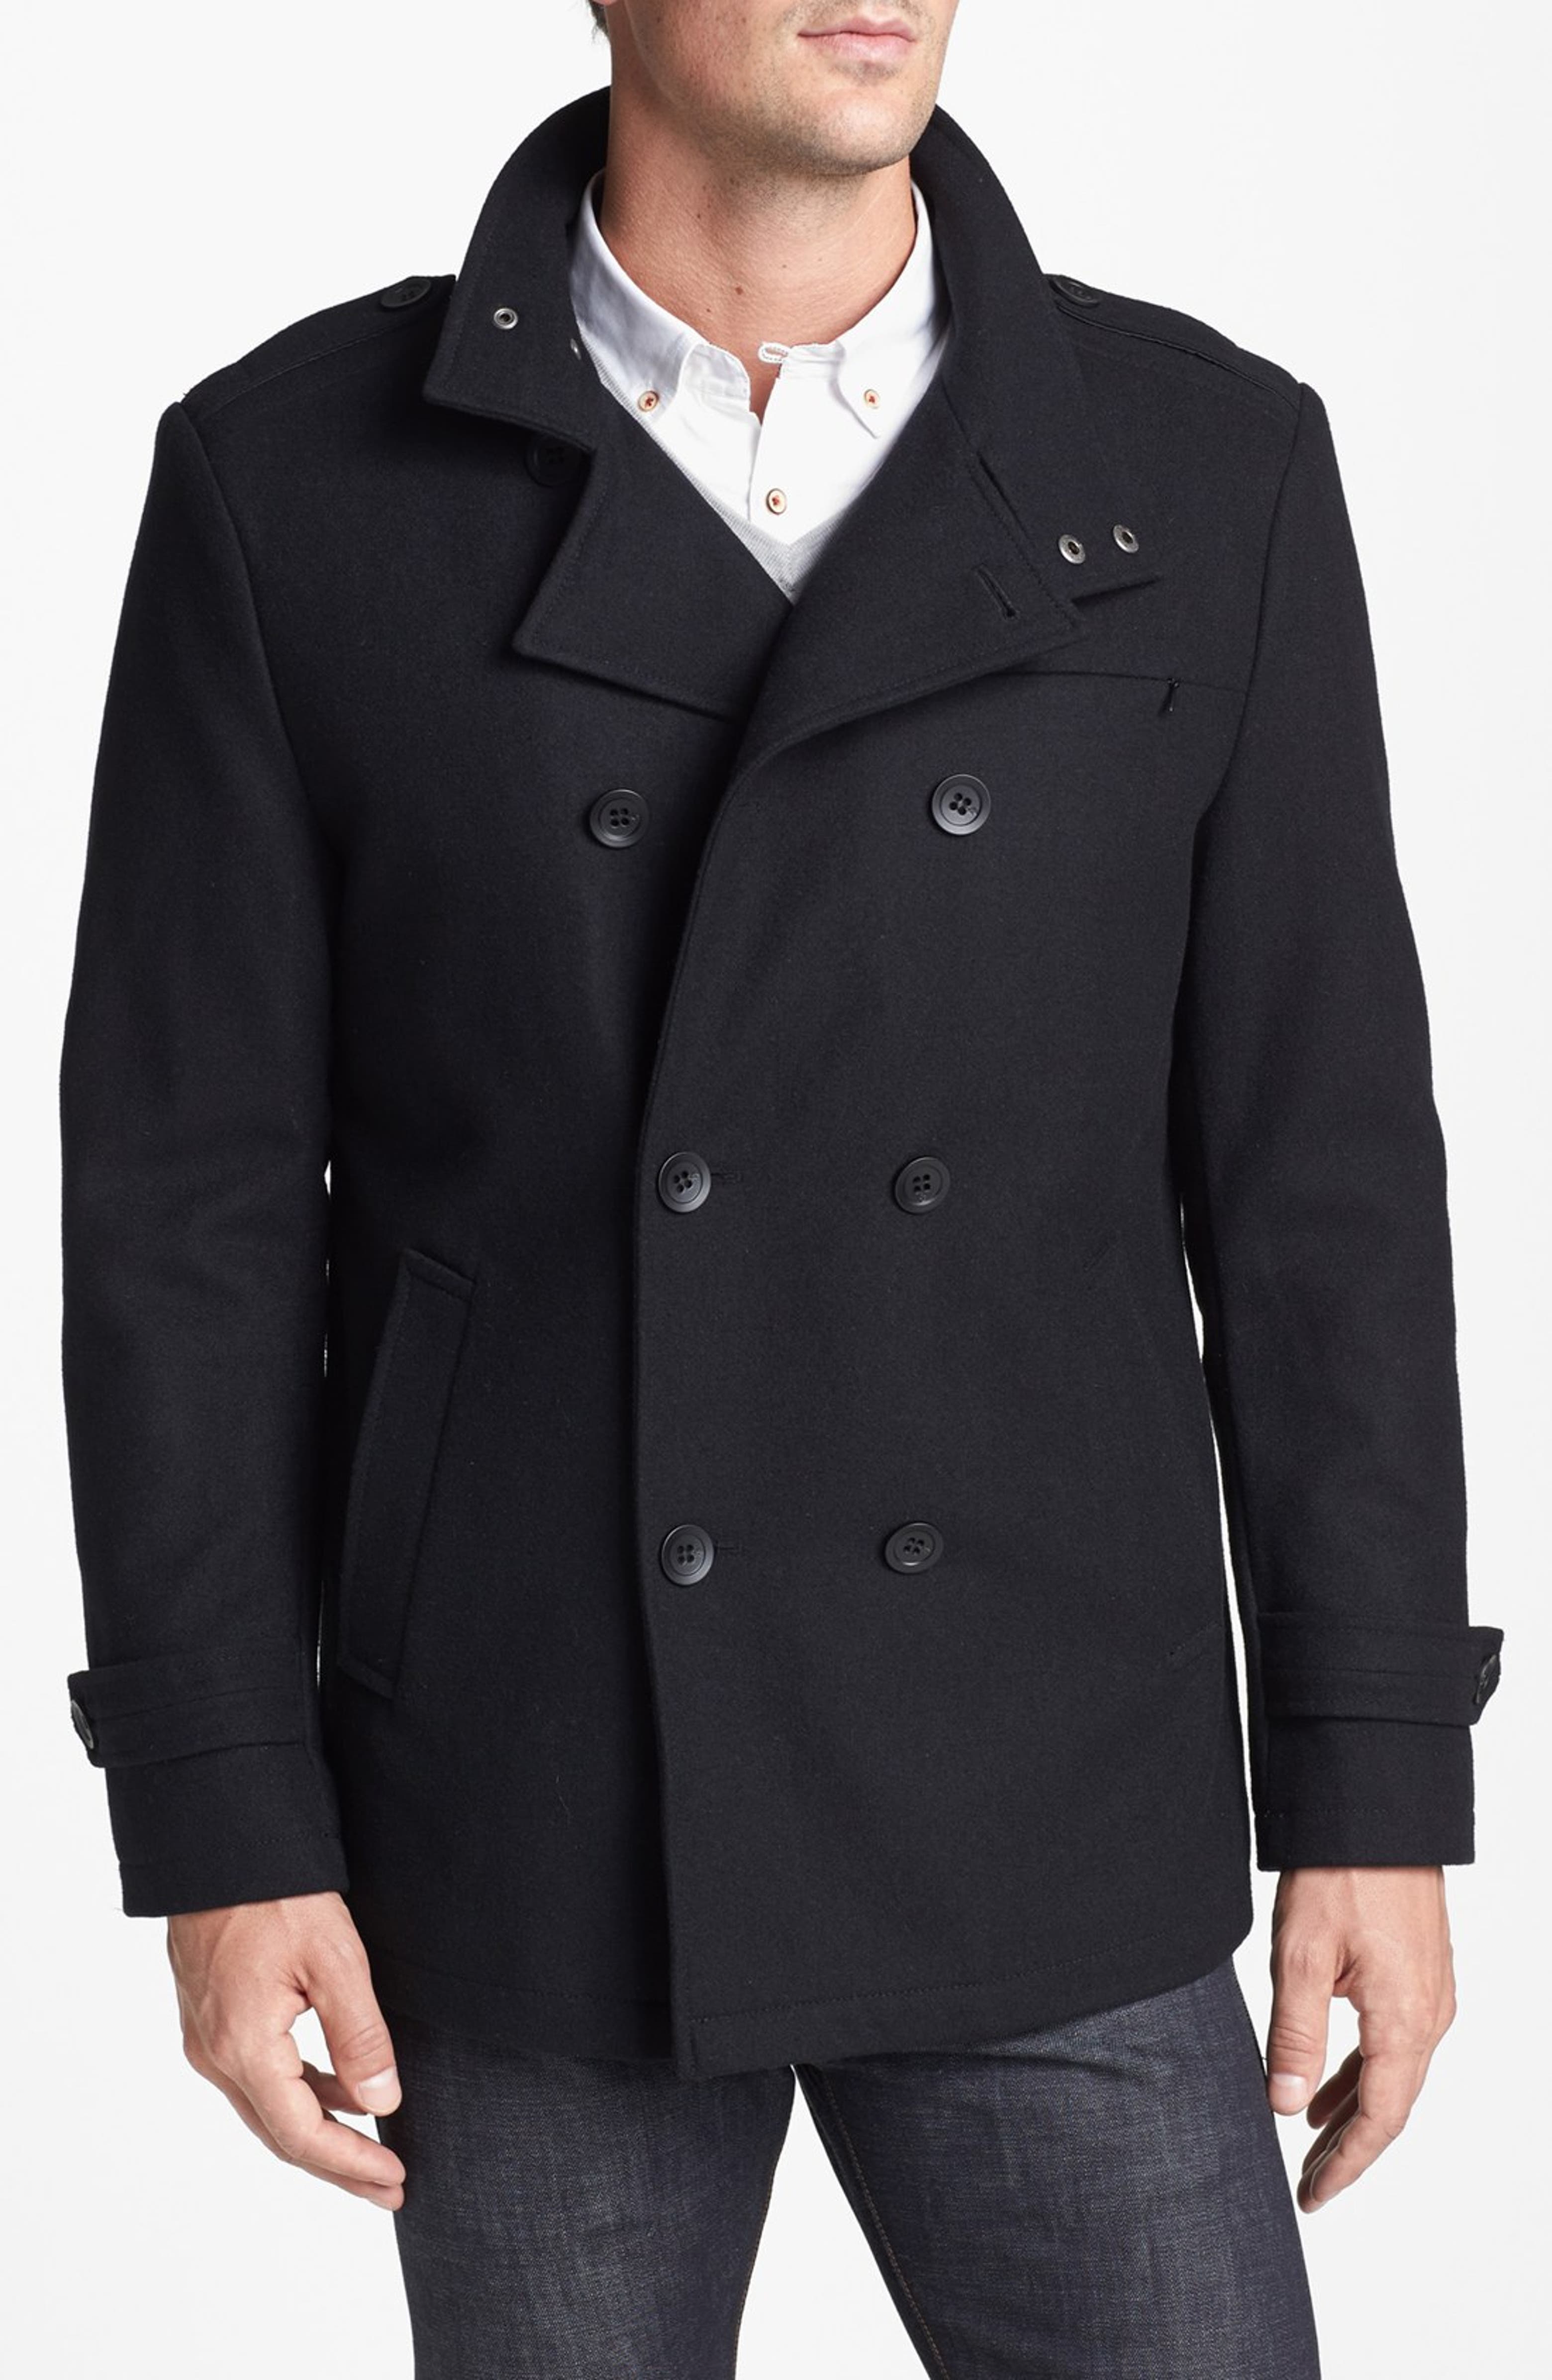 Kenneth Cole New York Melton Wool Peacoat | Nordstrom